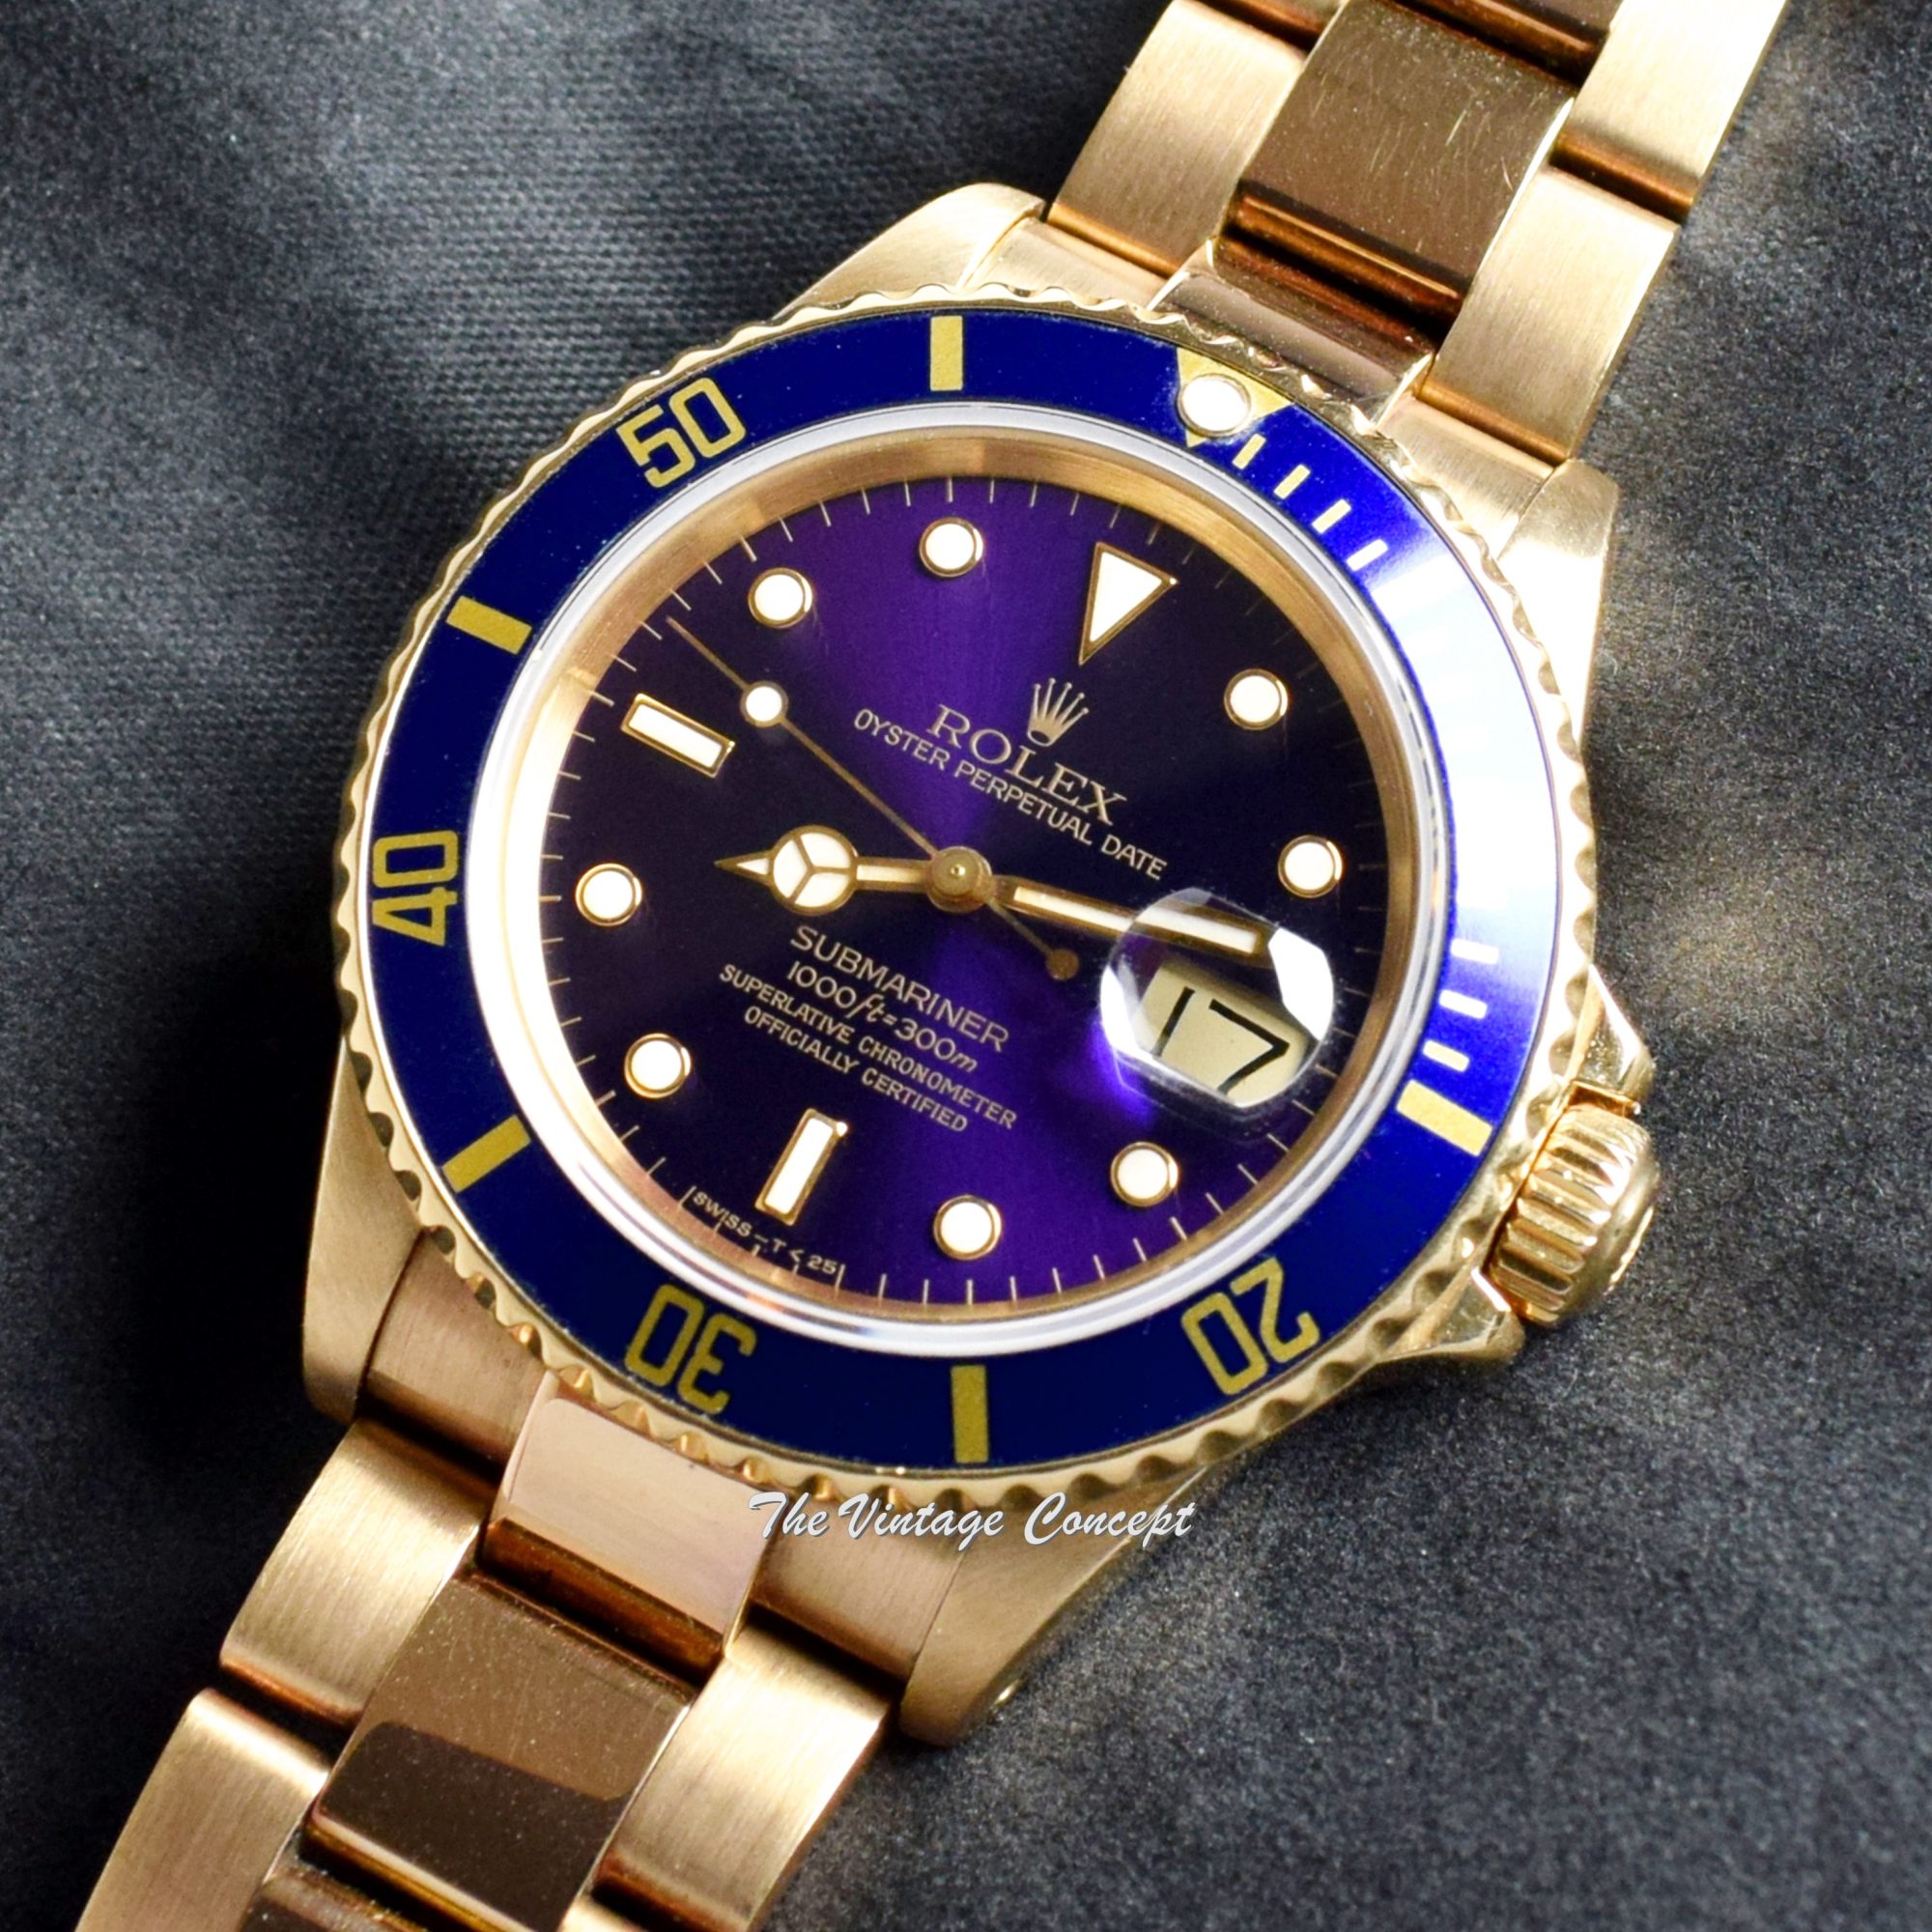 Rolex Submariner 18K Yellow Gold Purple Dial 16808 - The Vintage Concept